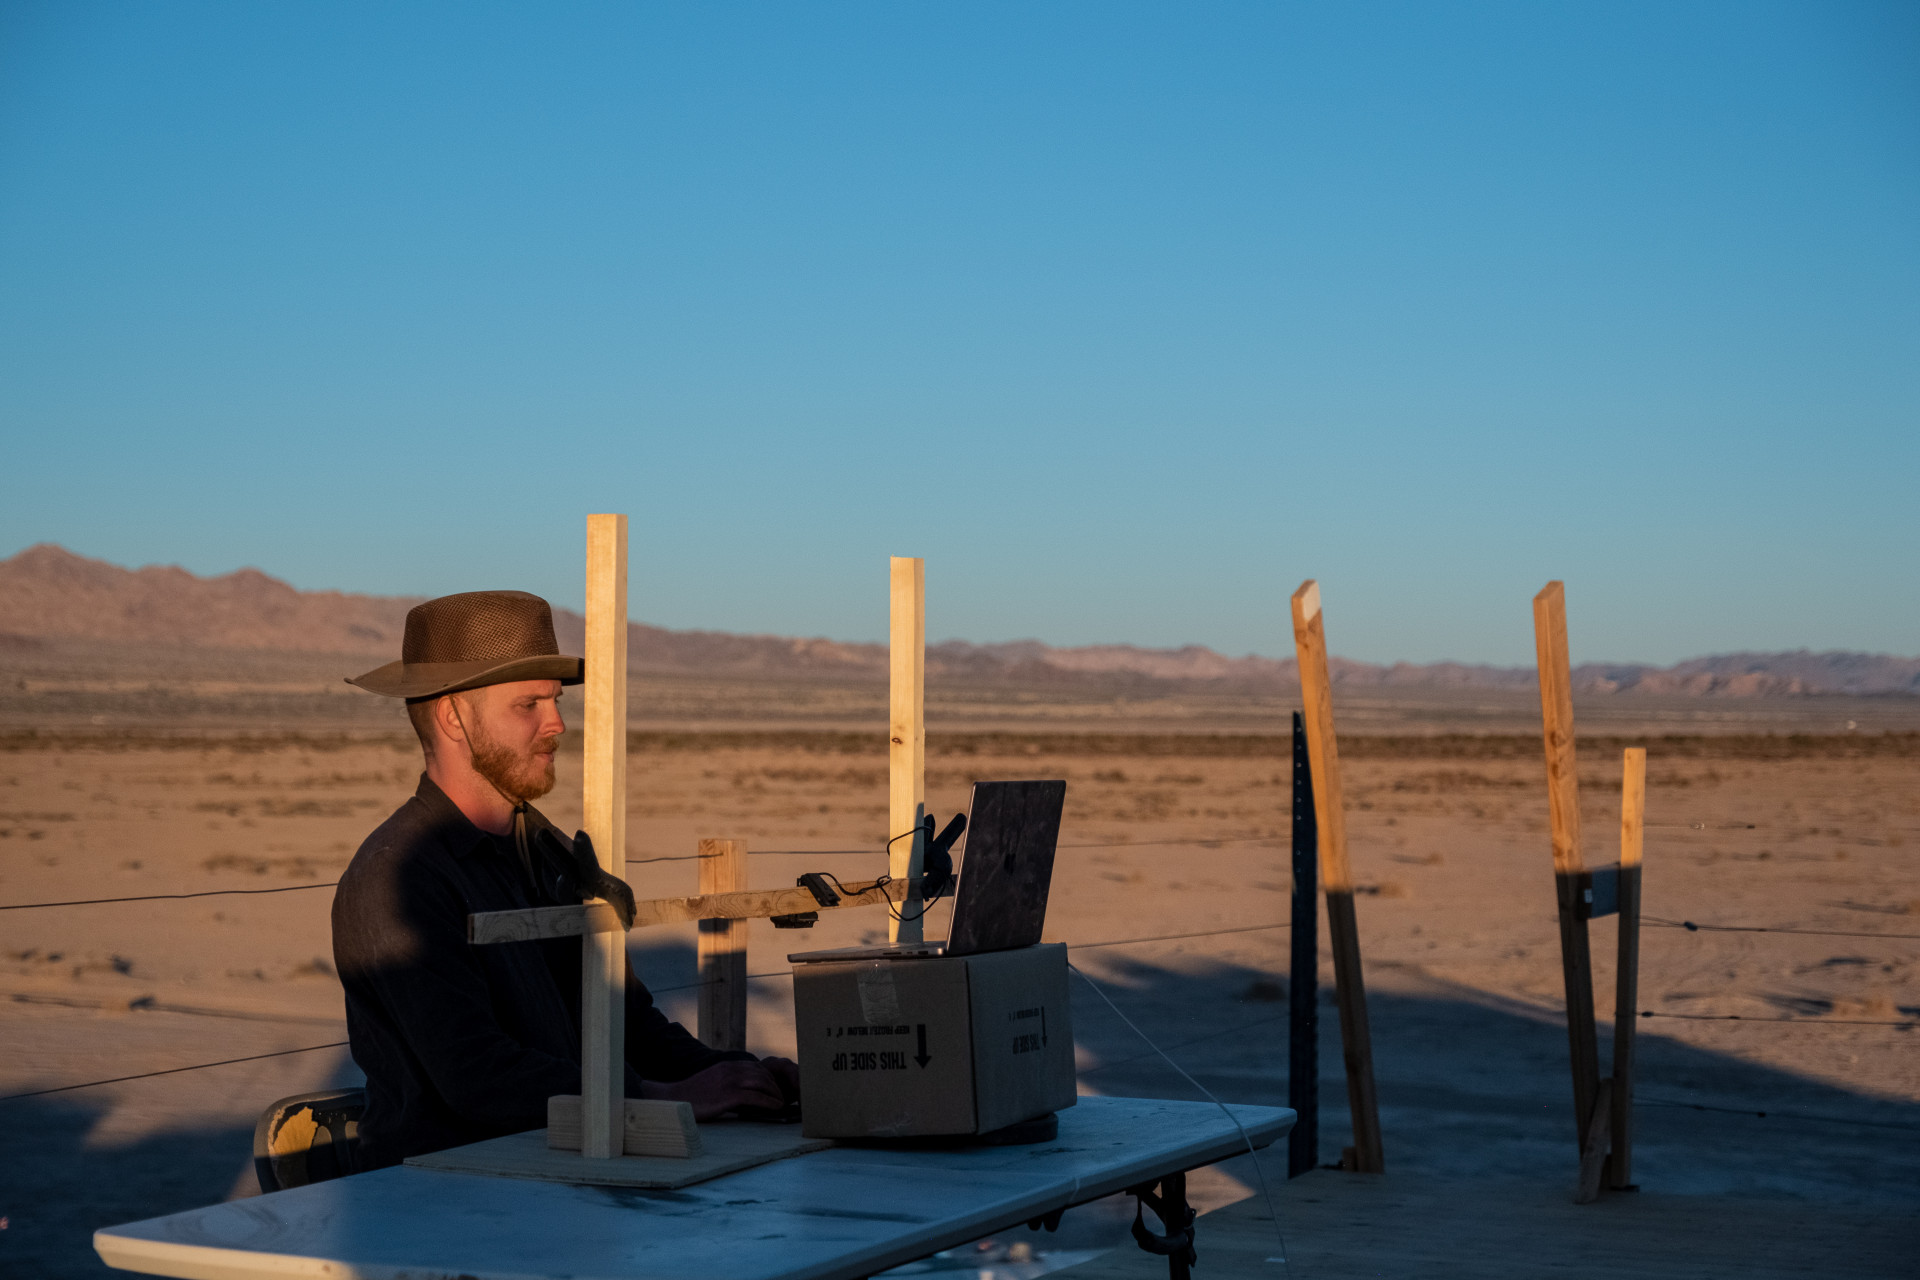 A man in a wide brimmed hat sits at a computer. Behind him is blue sky and desert